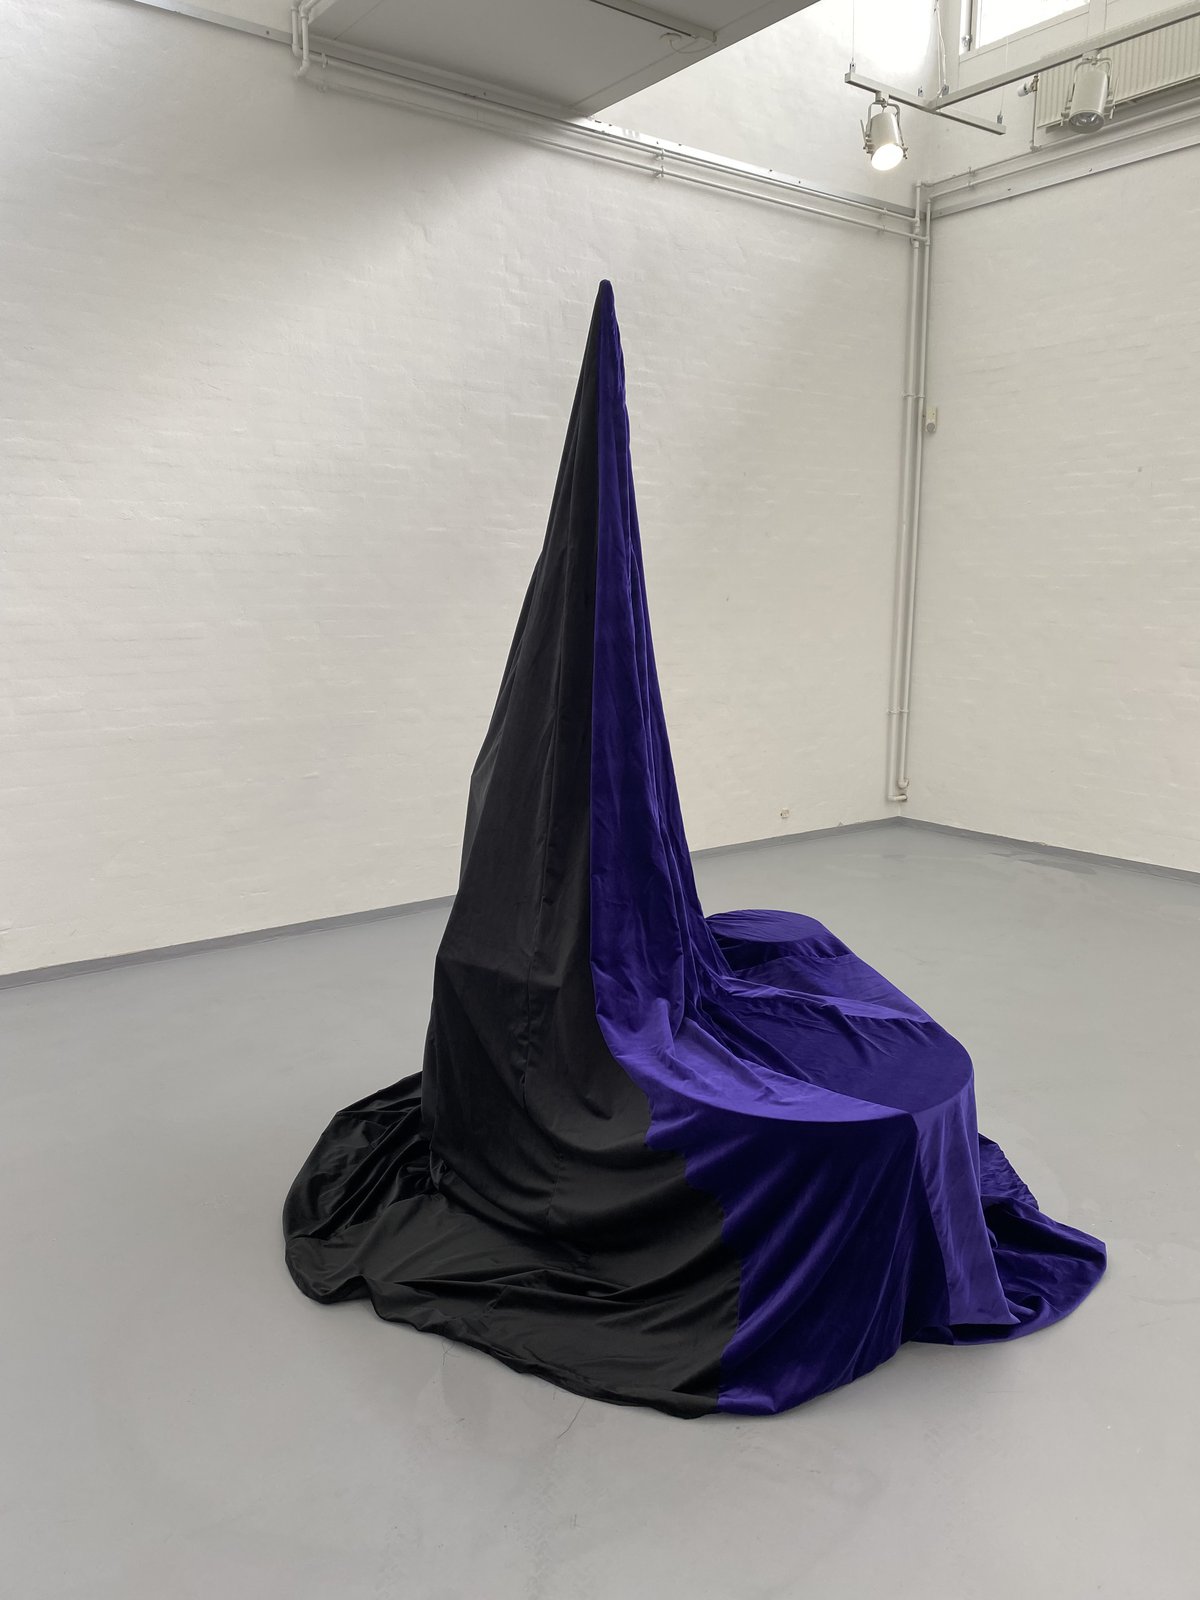 Anna-Sophie BergerCloak, 2021velvet, tripod and viariable hardwaredimensions variable